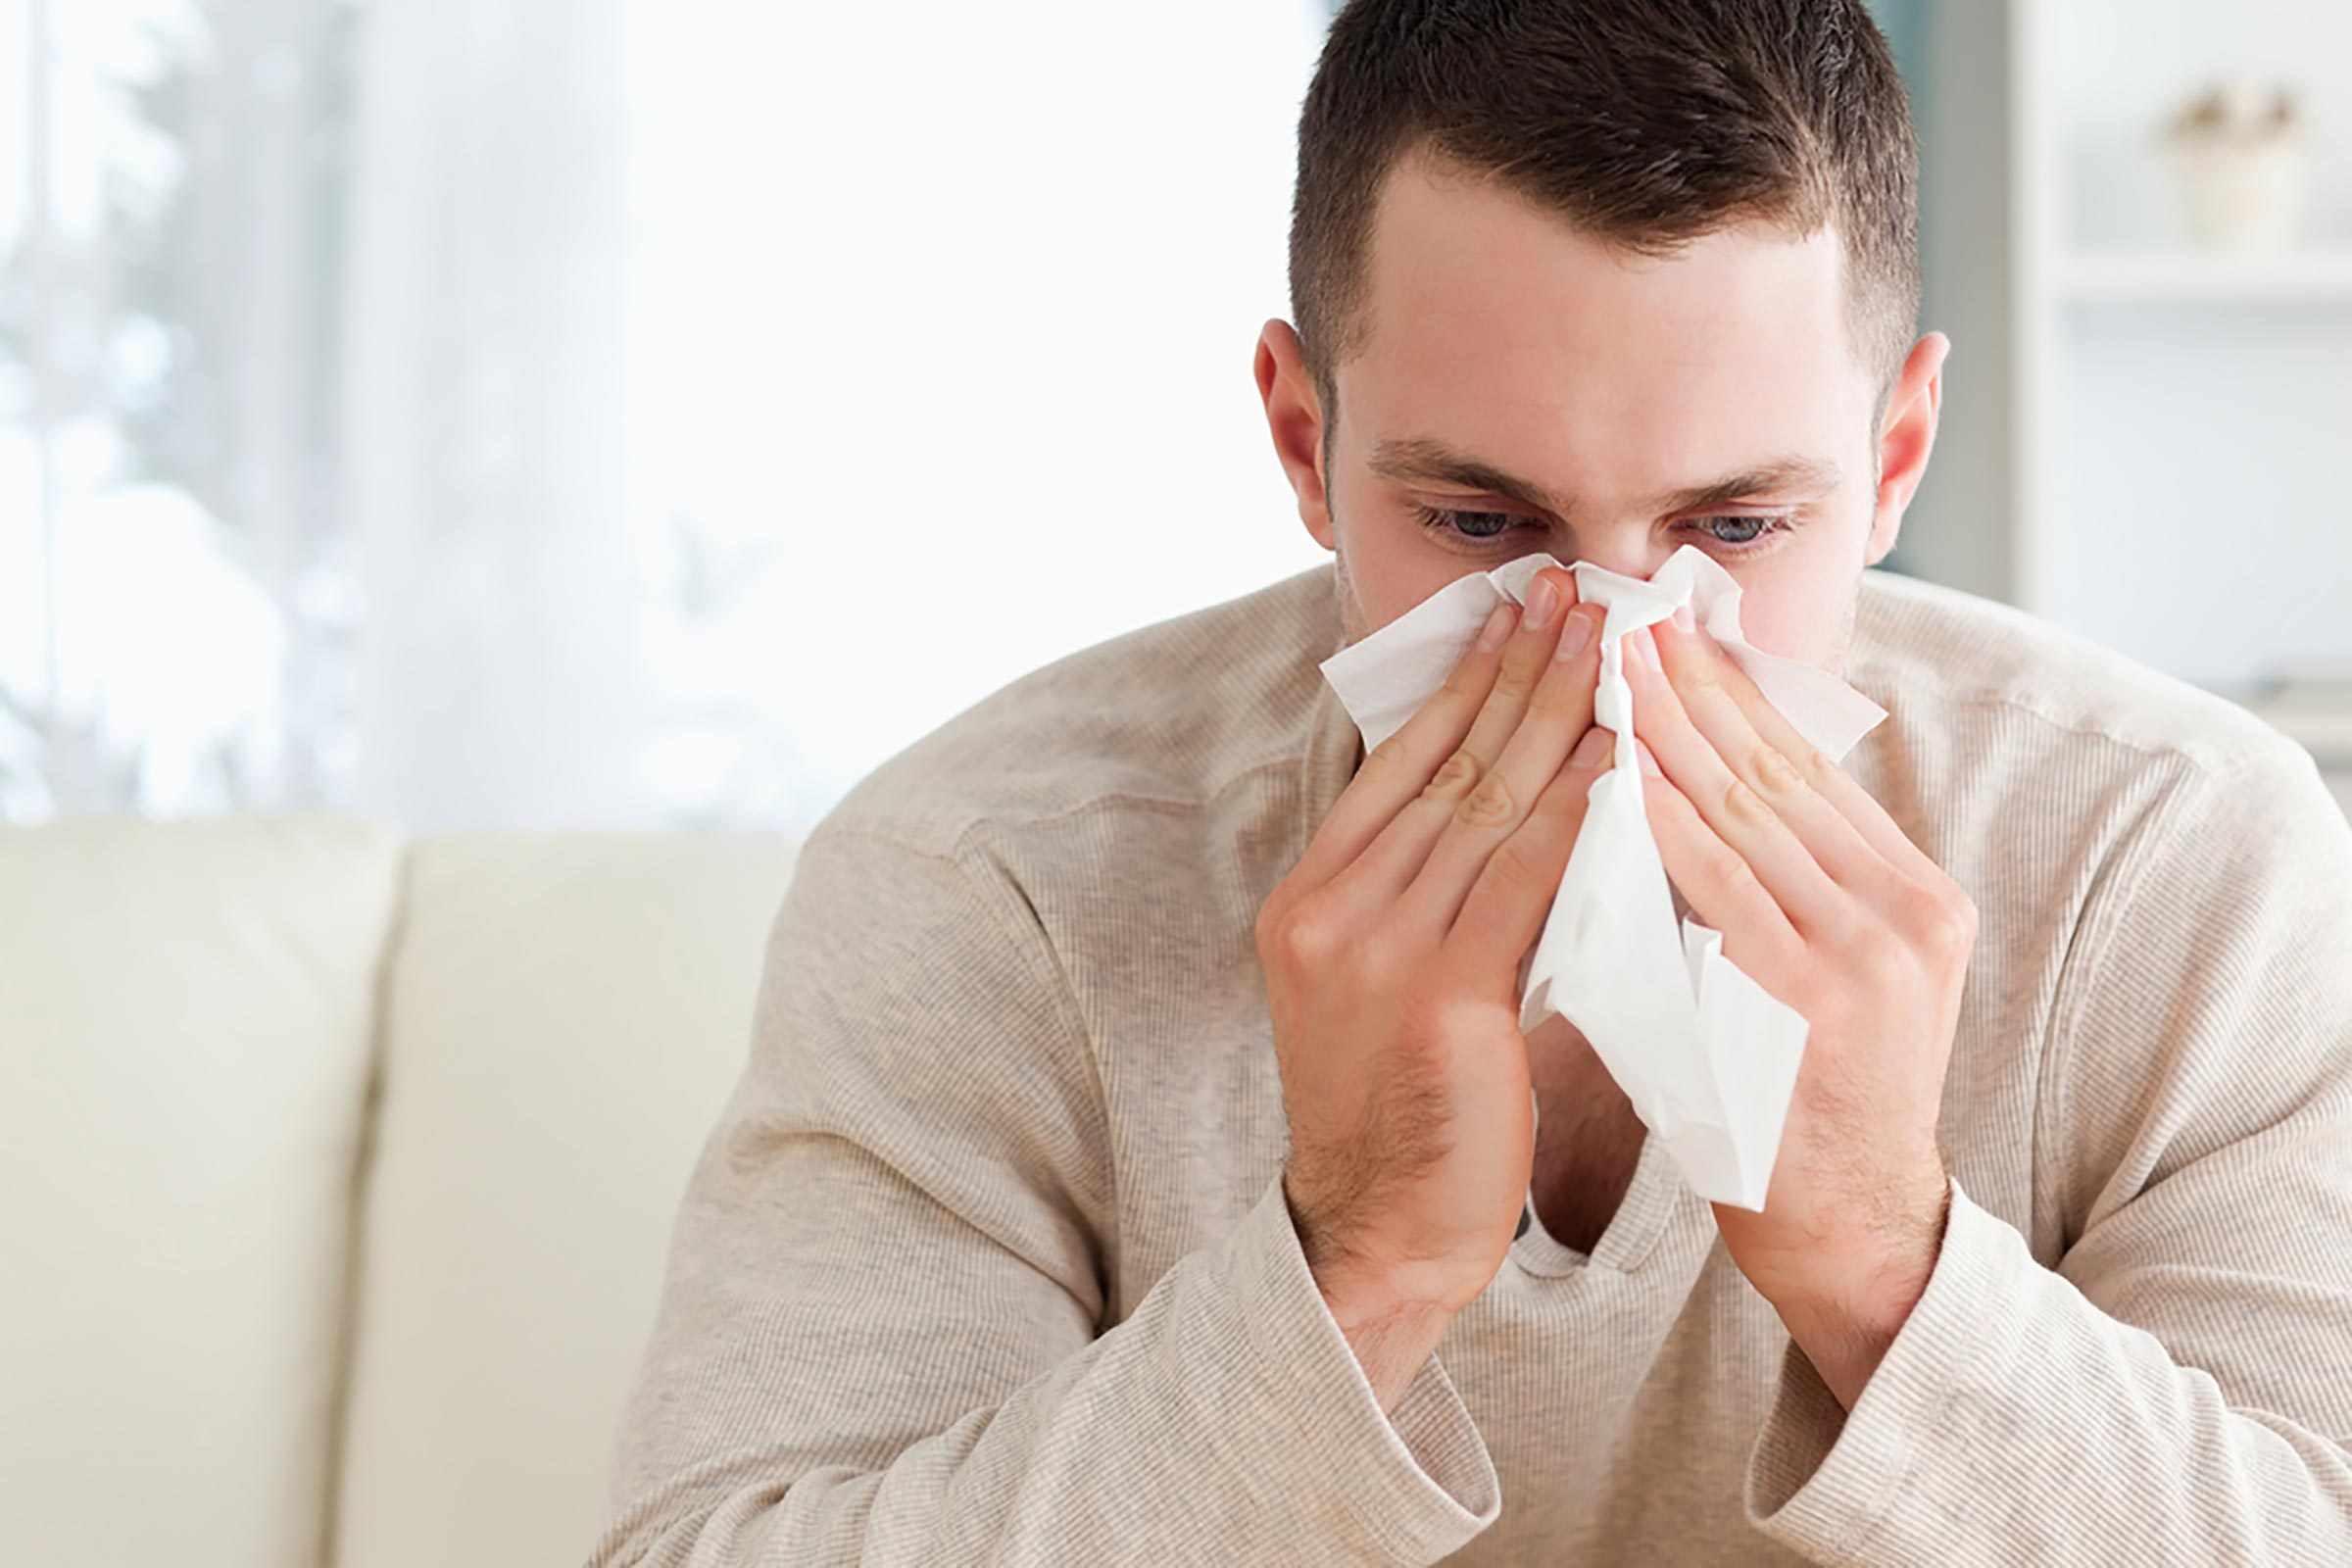 30 Everyday Mistakes That Raise Your Risk of Catching a Cold